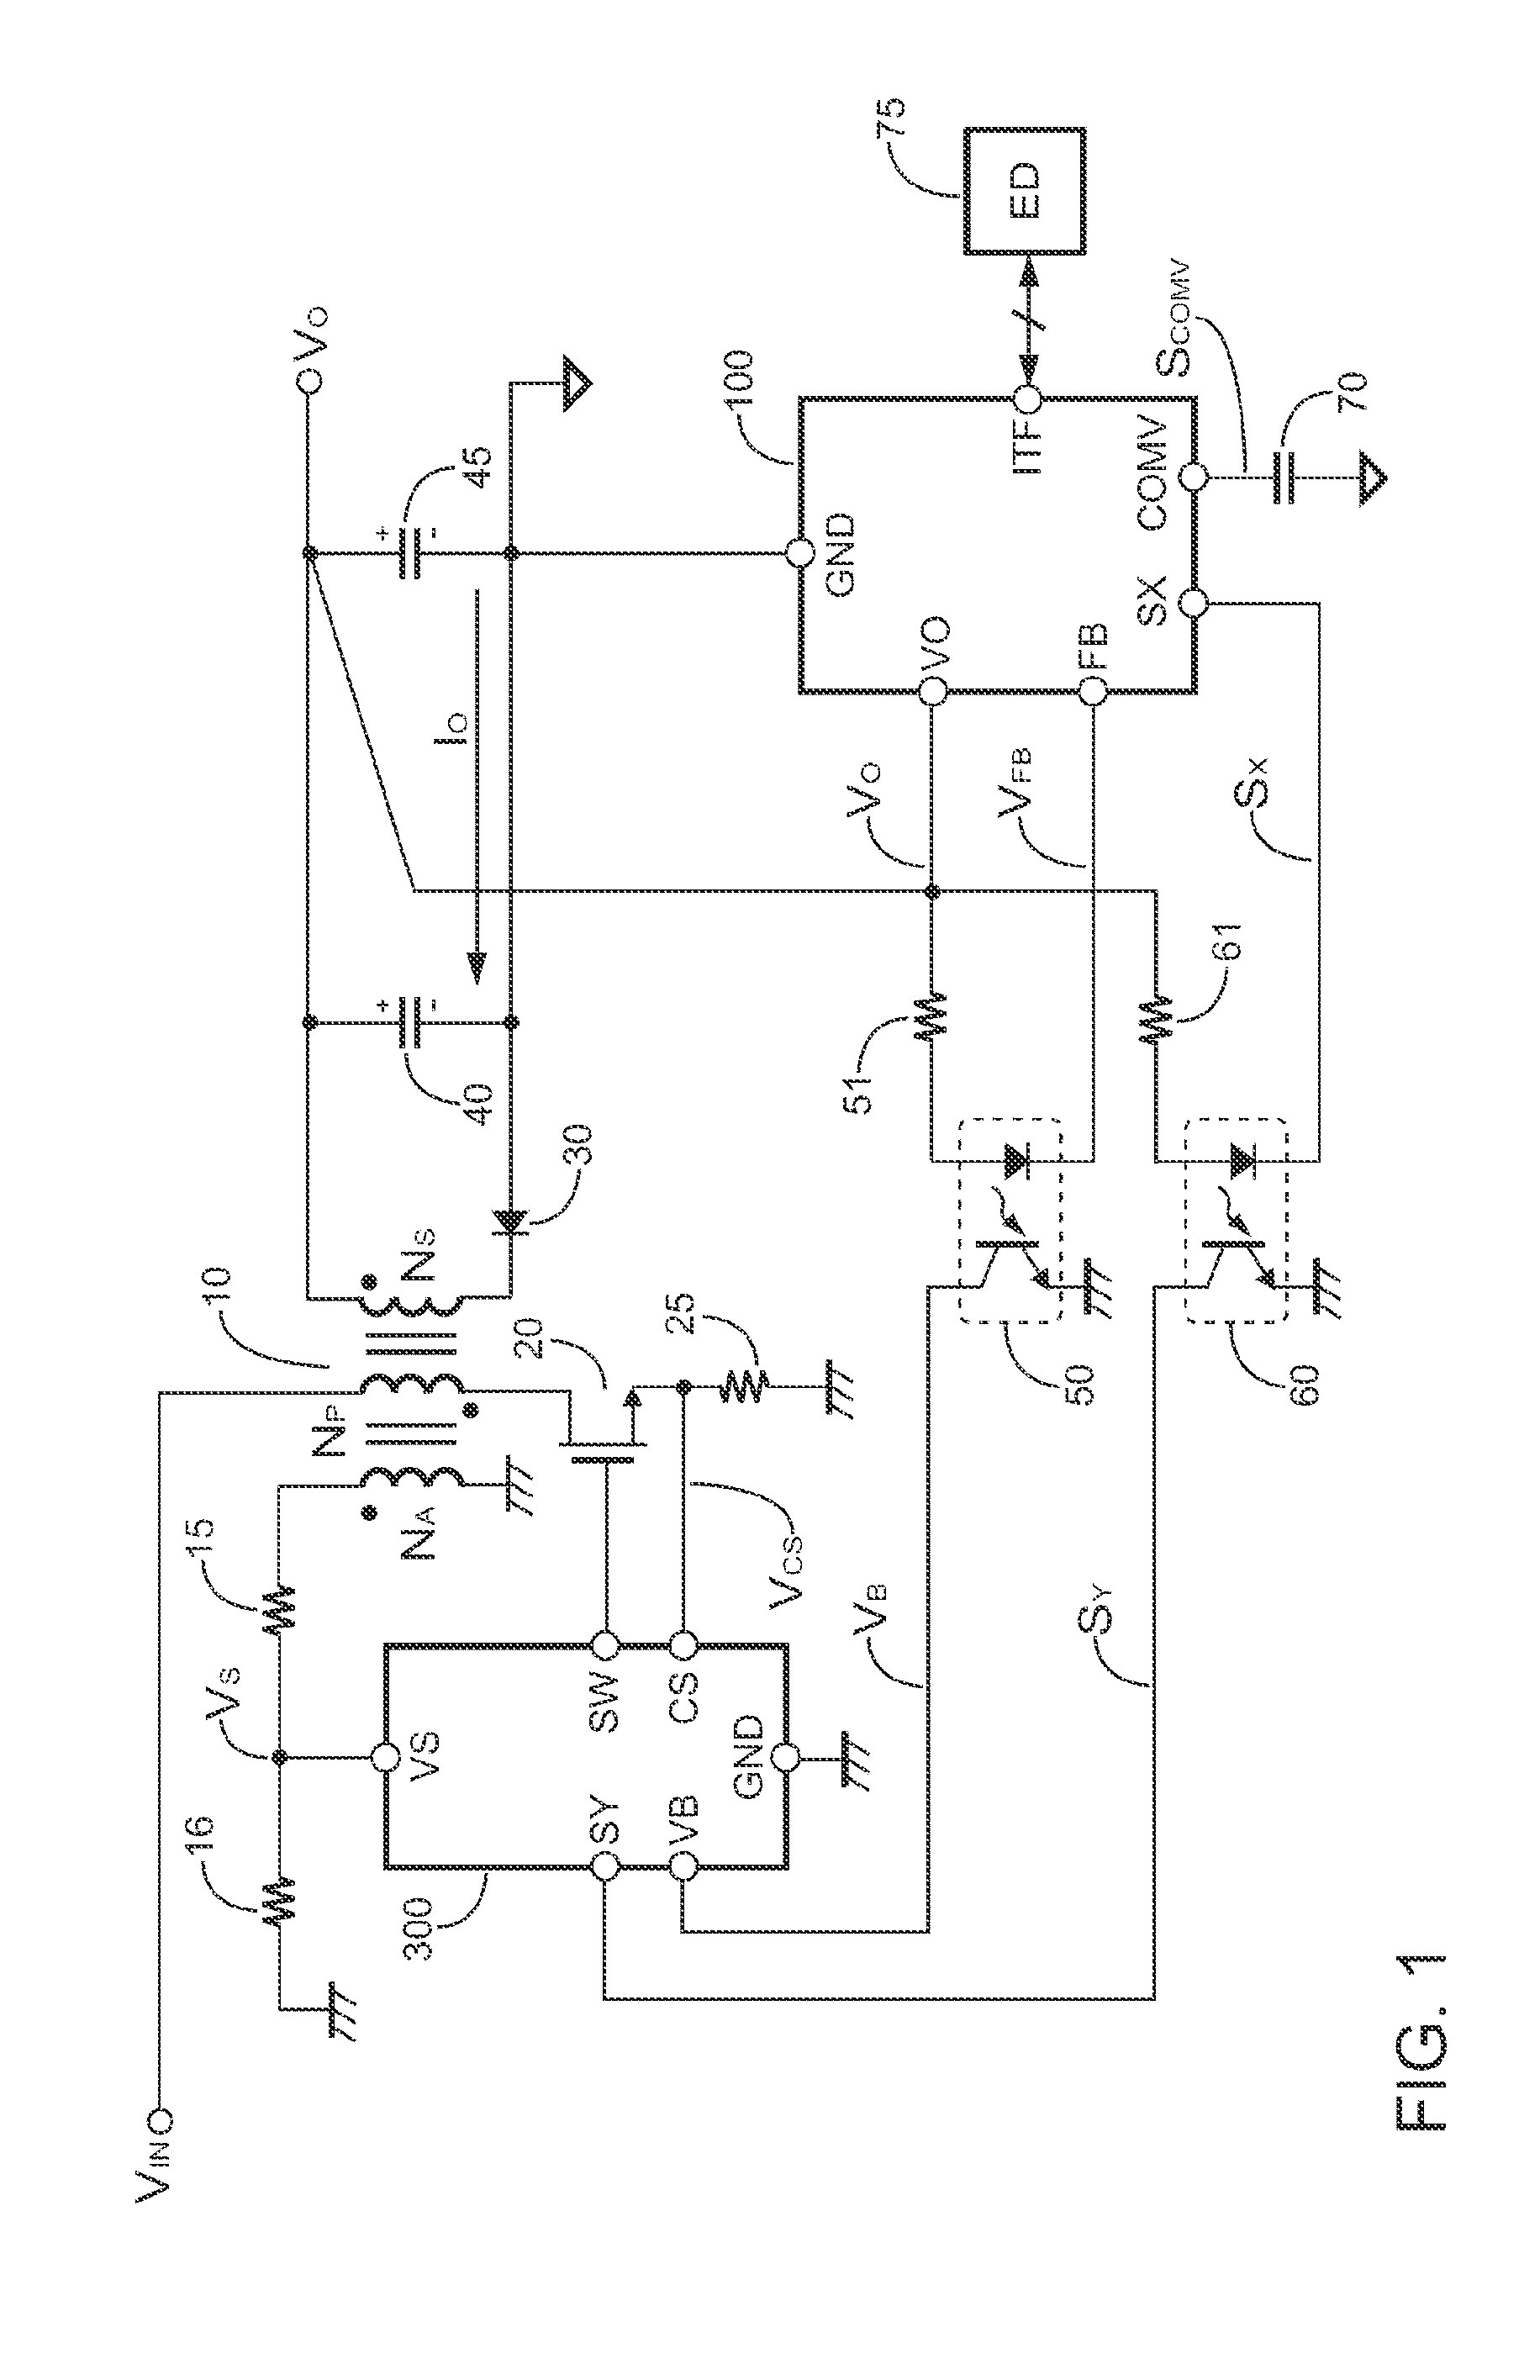 Primary-side controlled programmable power converter